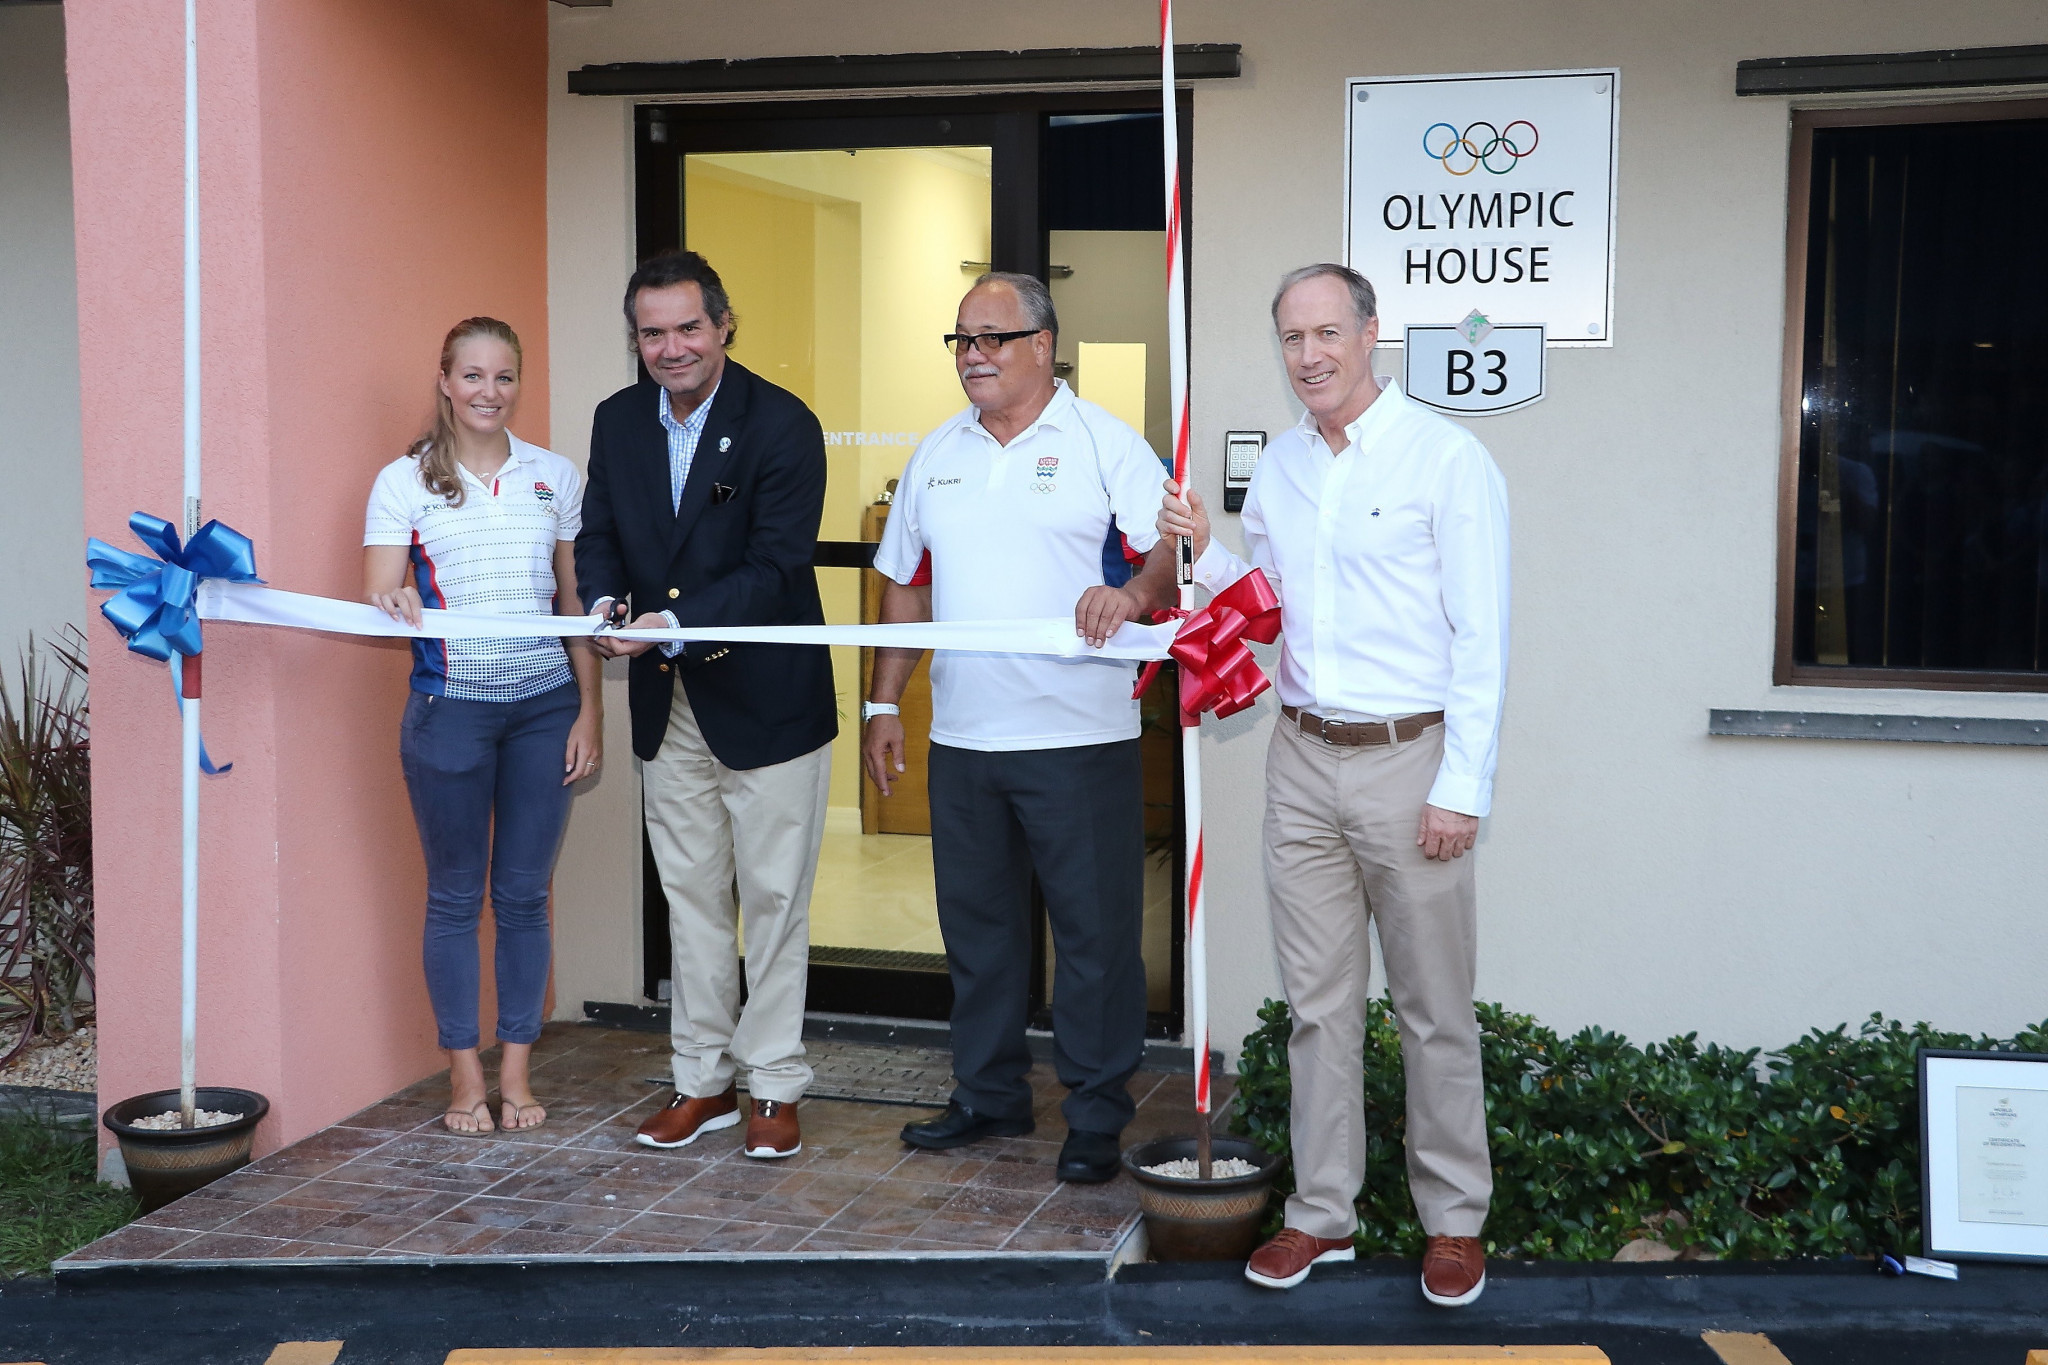 The Cayman Islands Olympic Committee has opened its first Olympic House in the Cayman Business Park in Georgetown ©Panam Sports